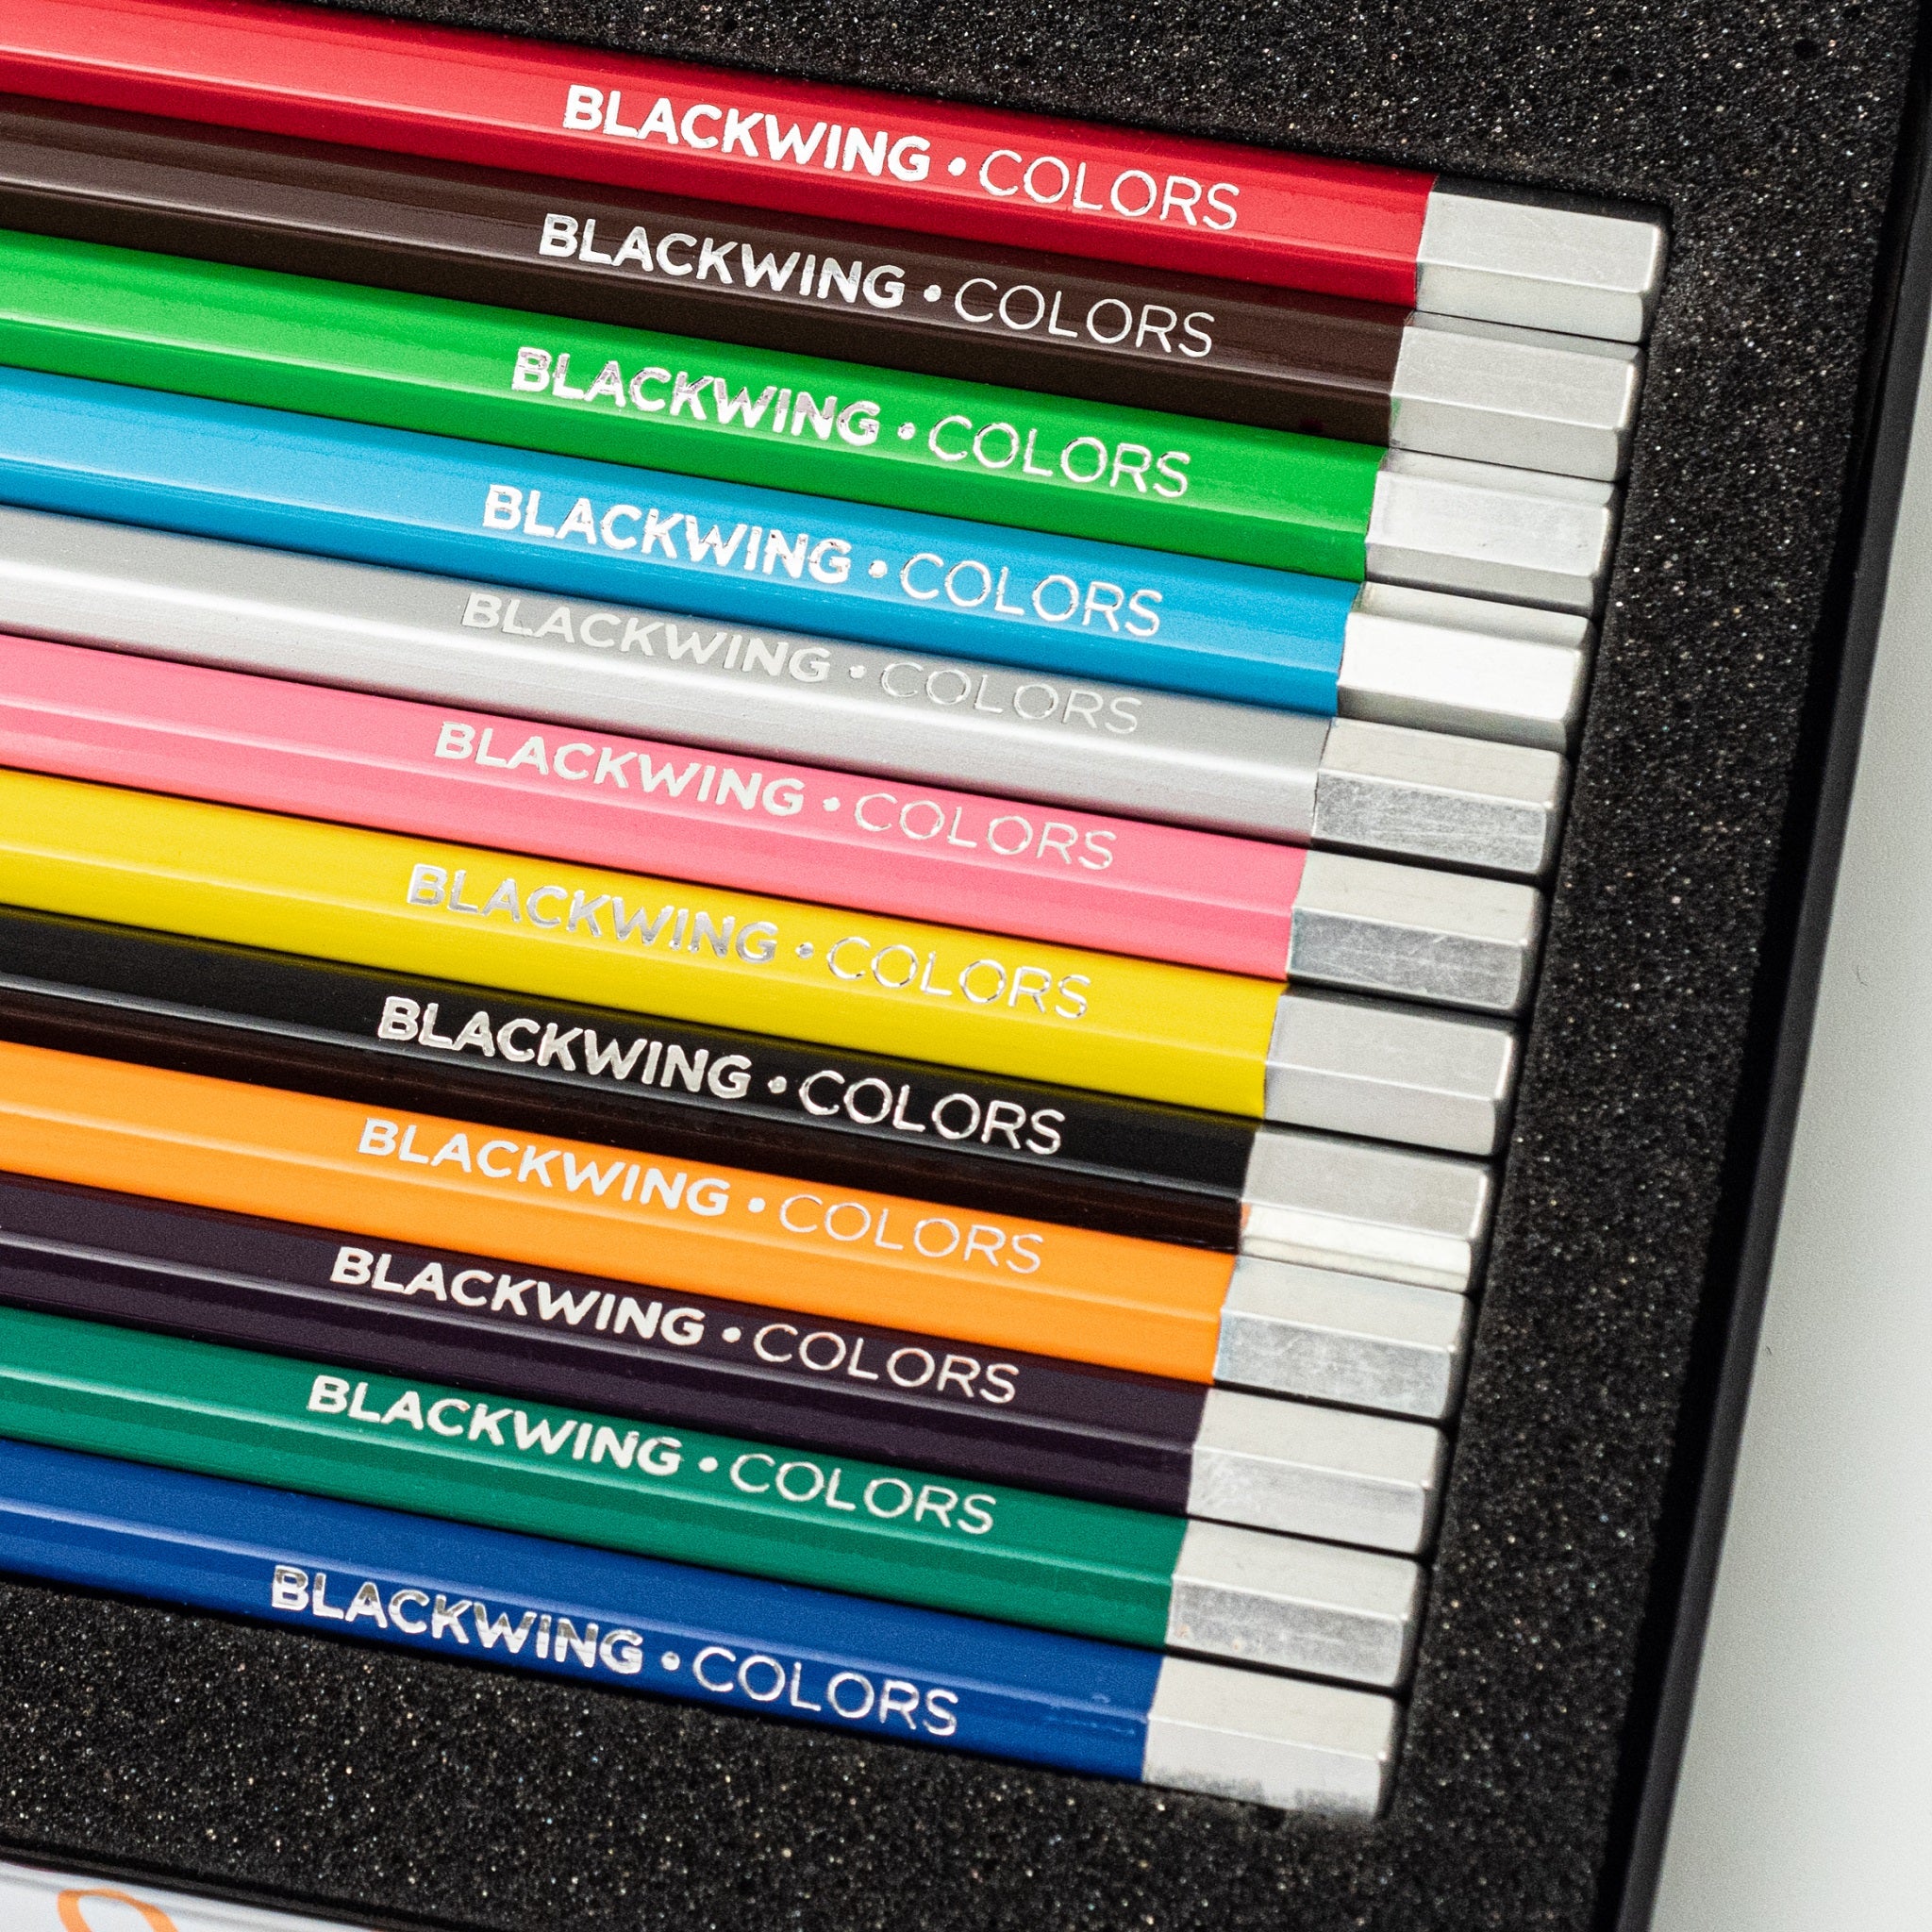 How to Make Any Color from 12 Colored Pencils